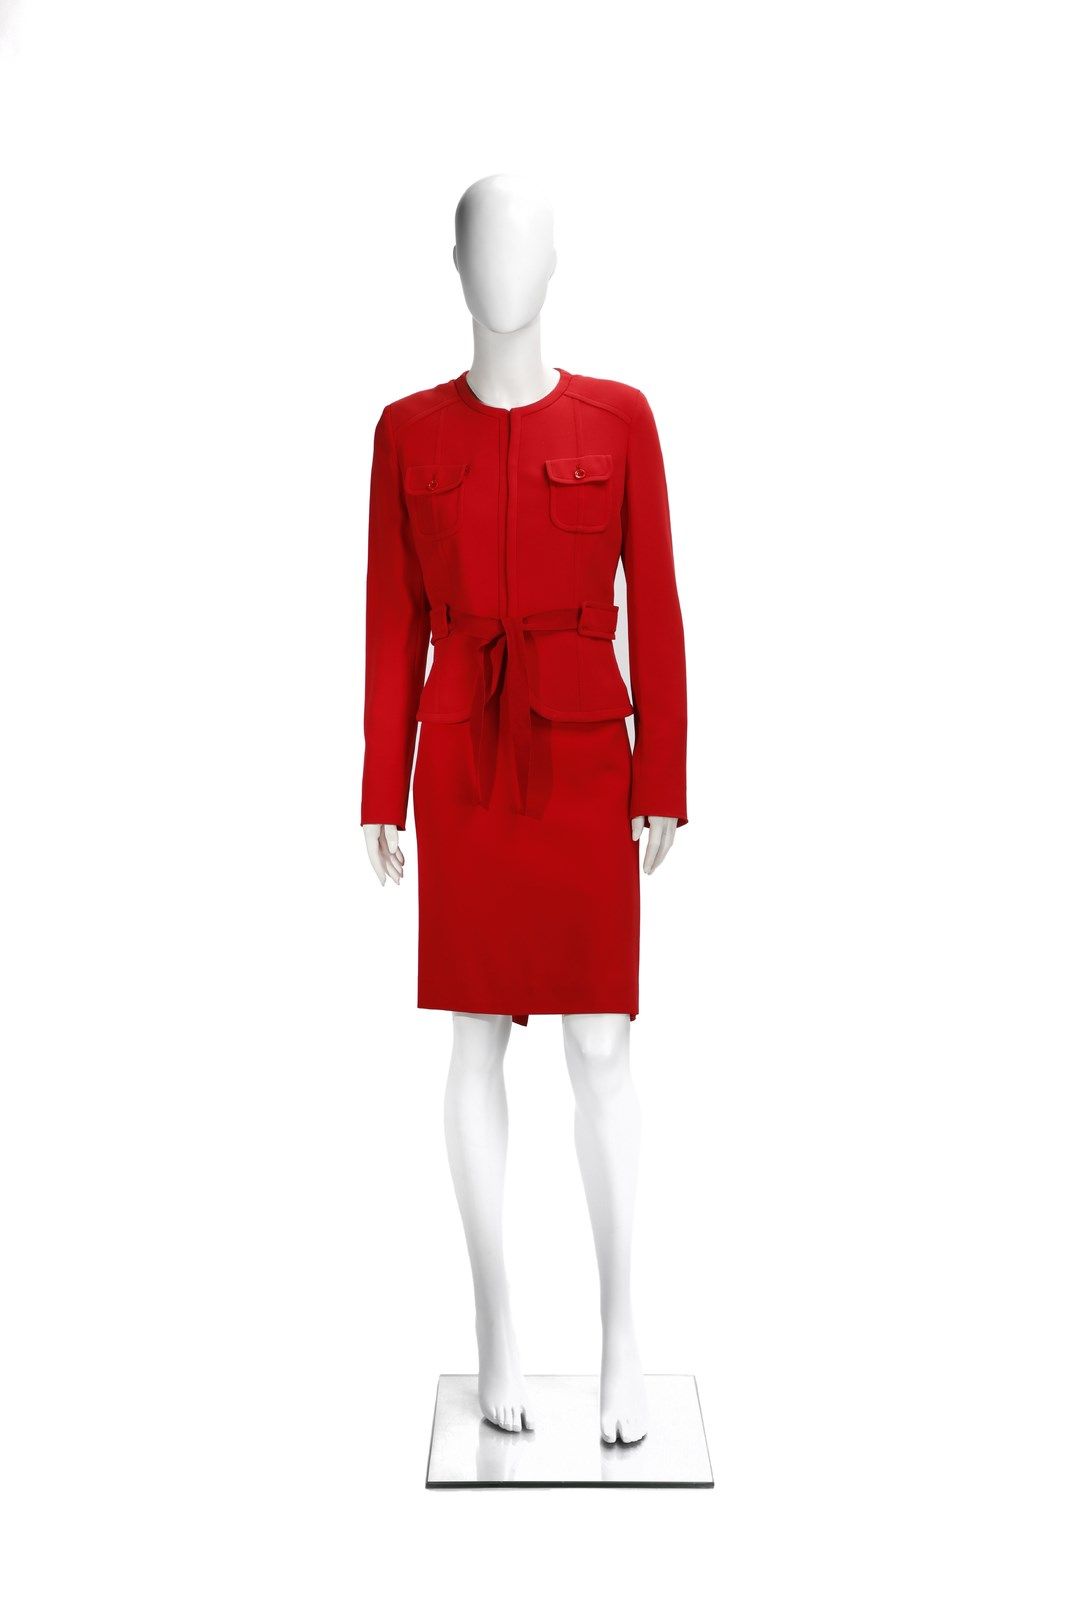 VALENTINO Red suit consisting of jacket with sash closure and front pockets and &hellip;